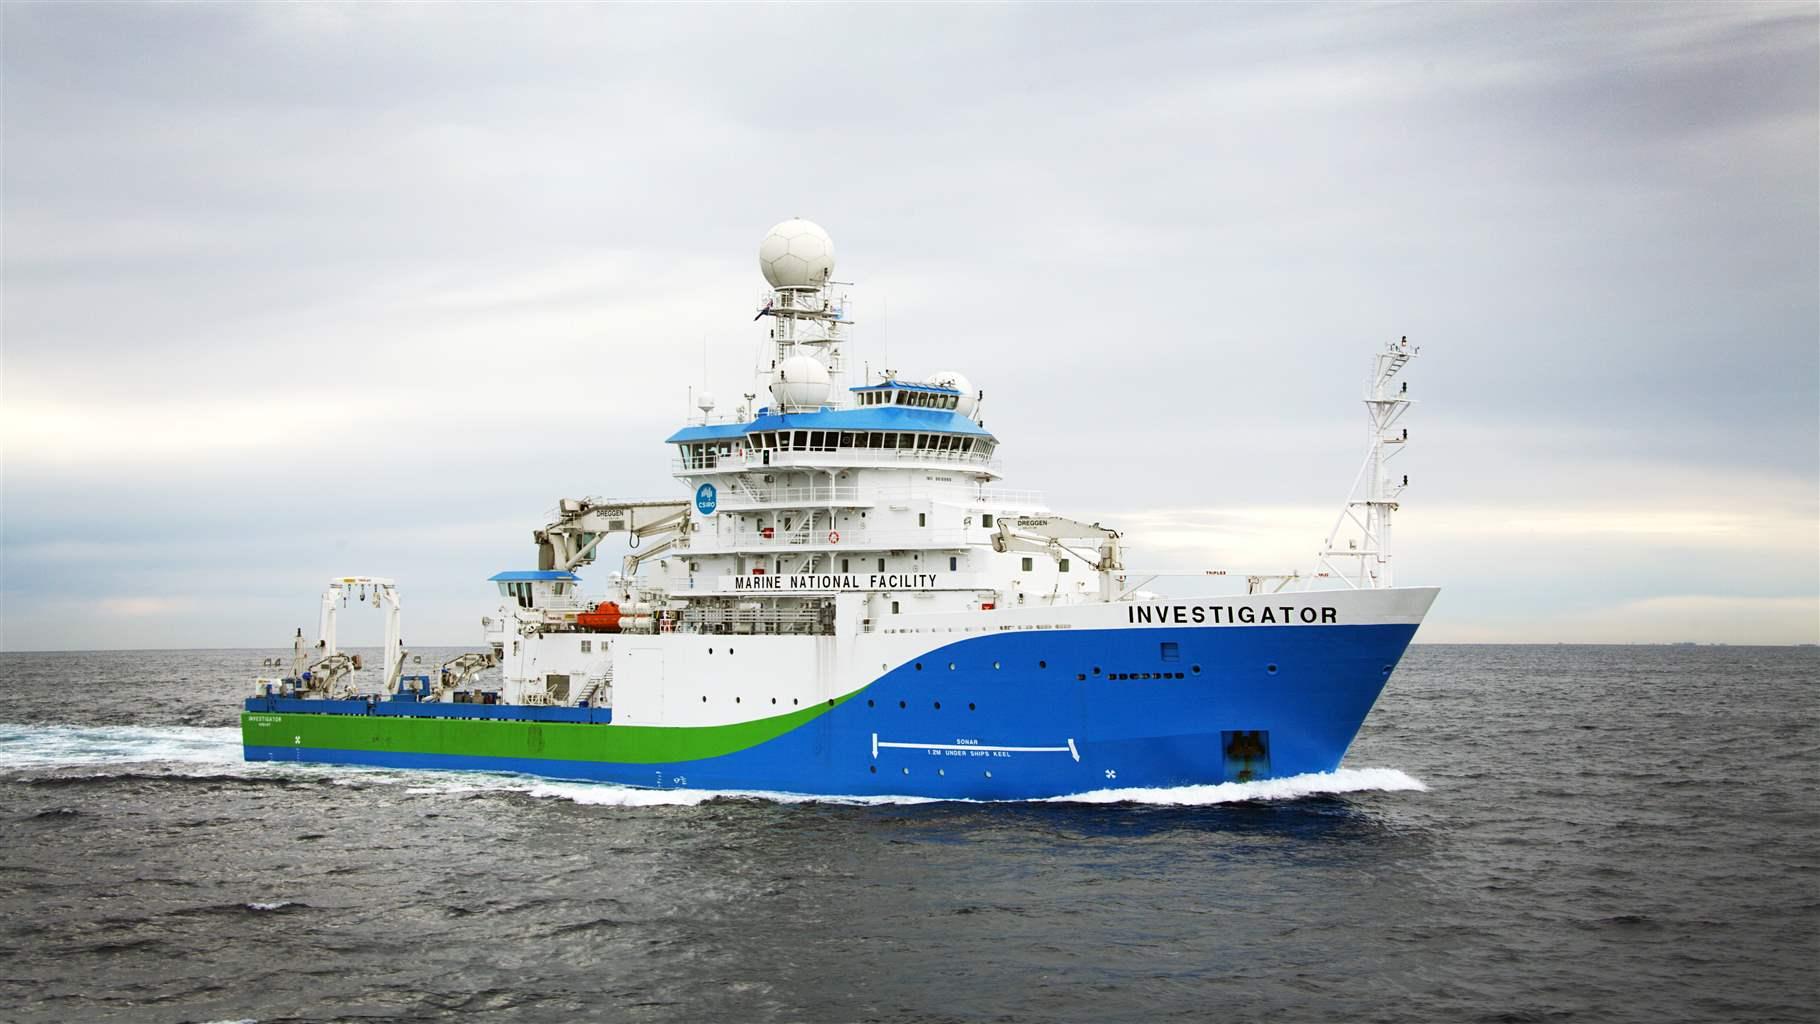 Important krill research will be the focus of a team of scientists heading to East Antarctica on the research vessel Investigator.